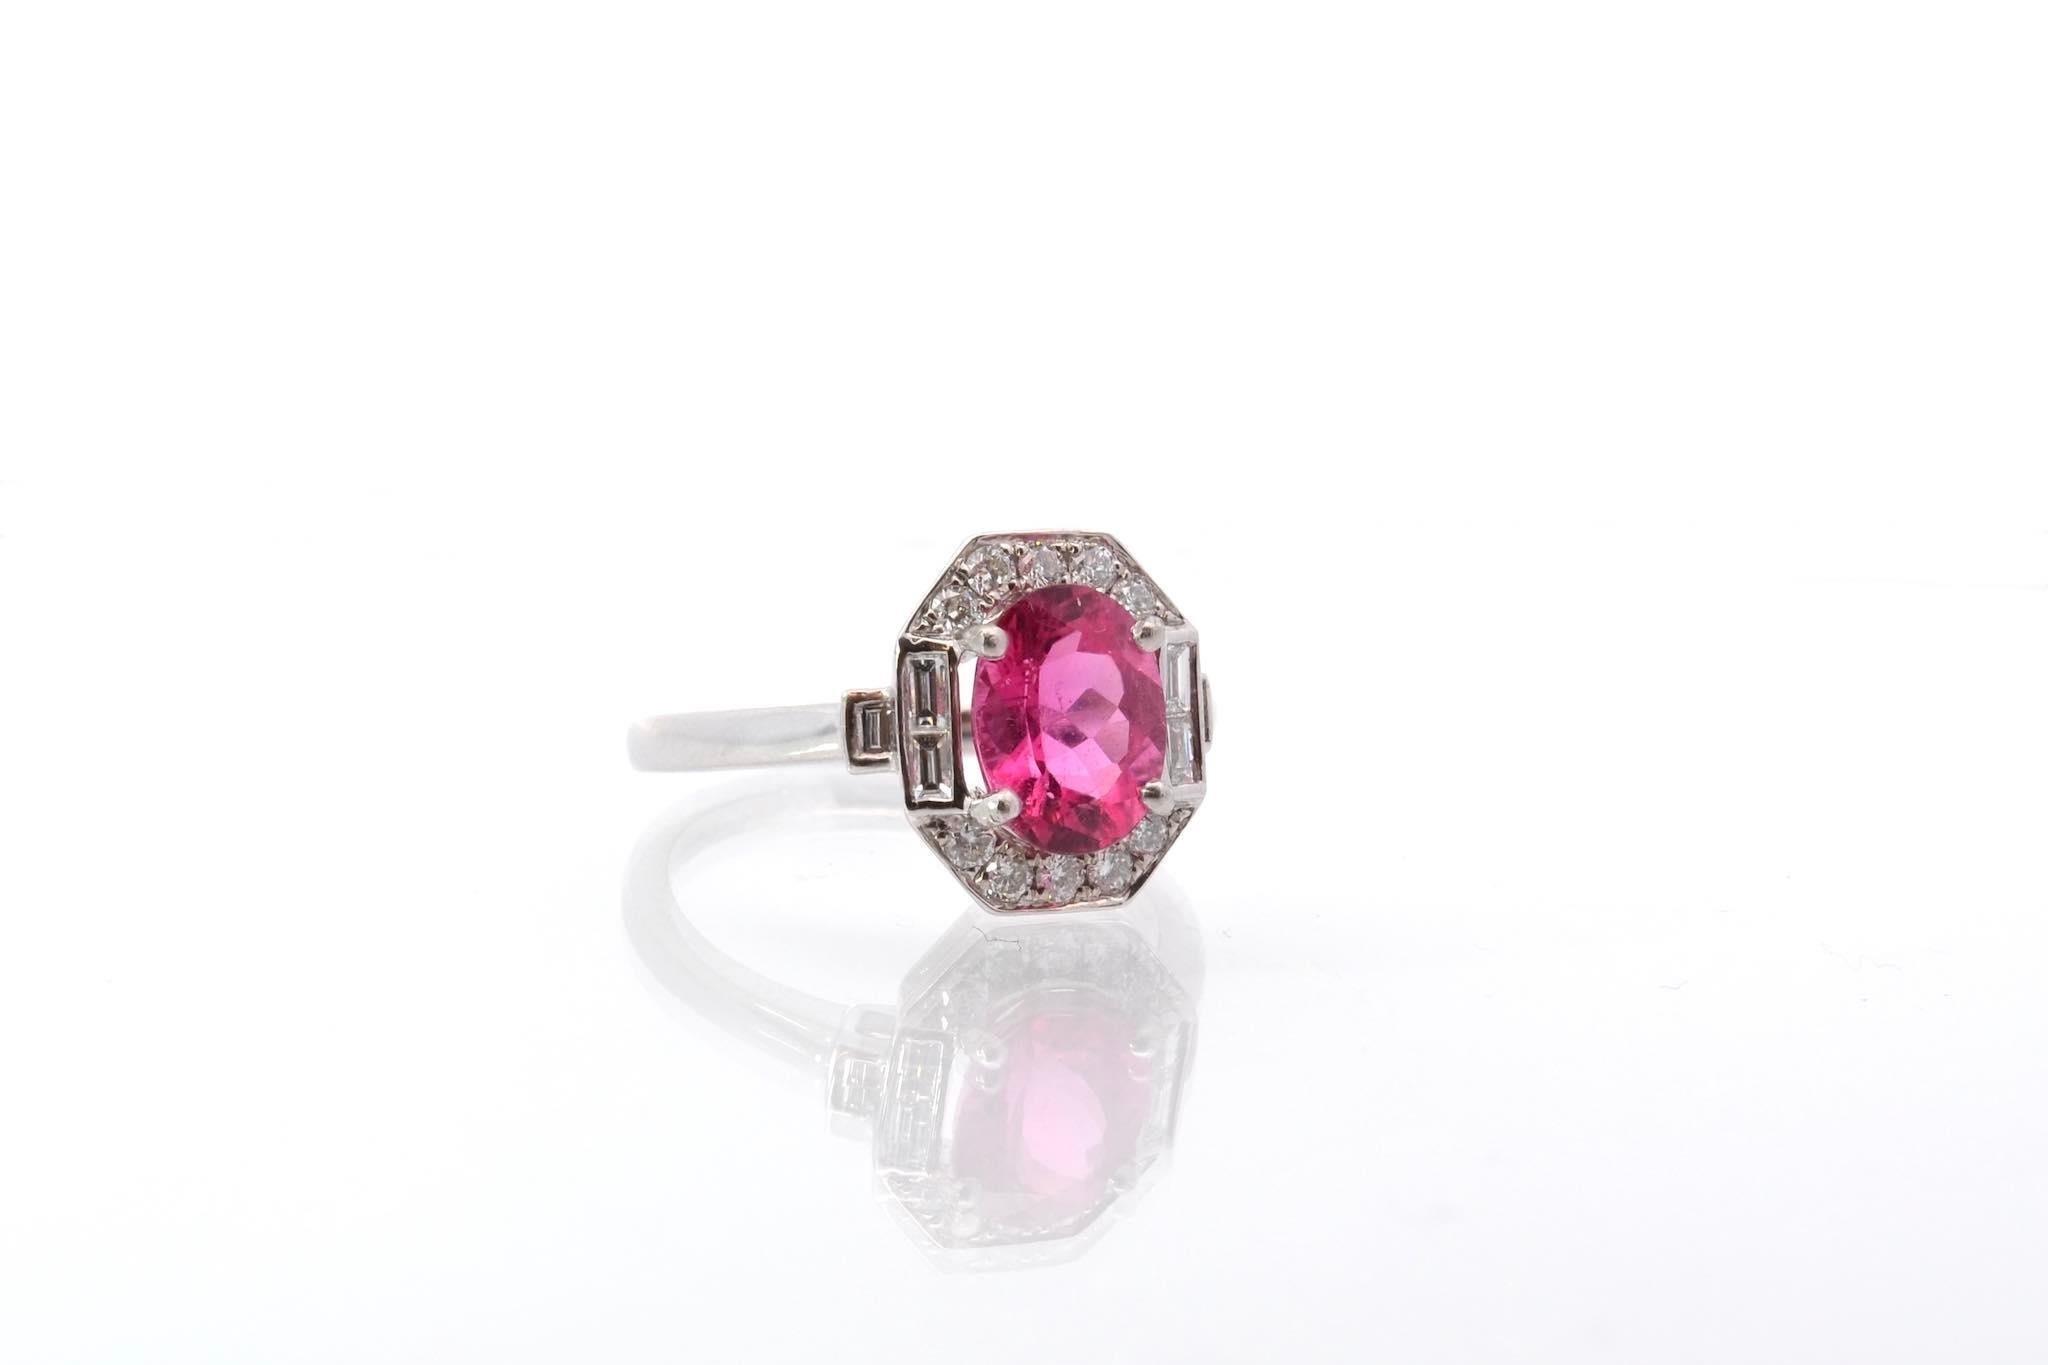 Oval Cut Tourmaline and diamonds ring in 18k gold